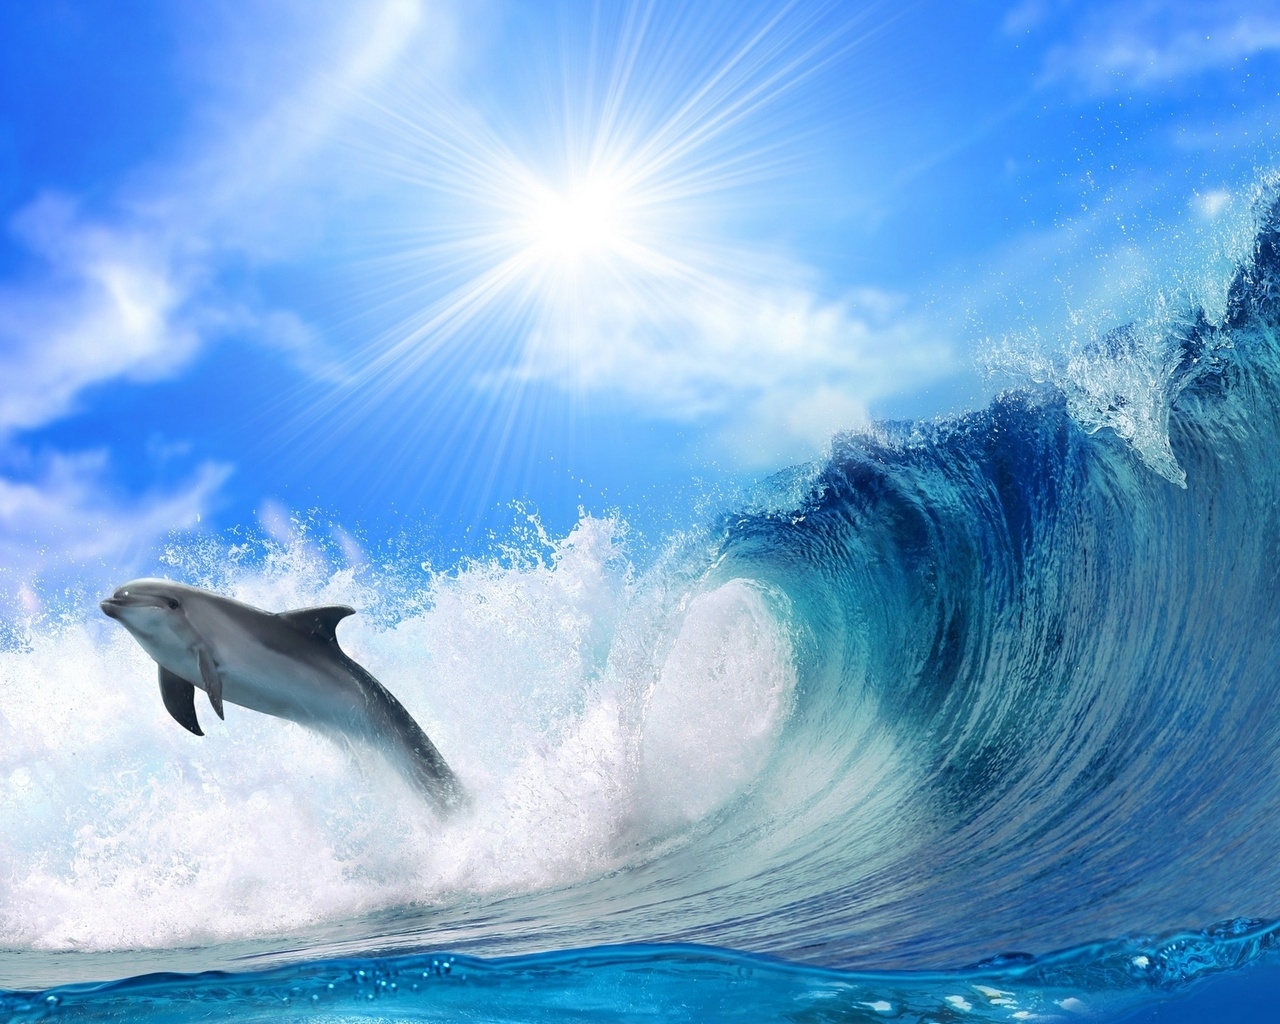 Dolphin ahead of the wave